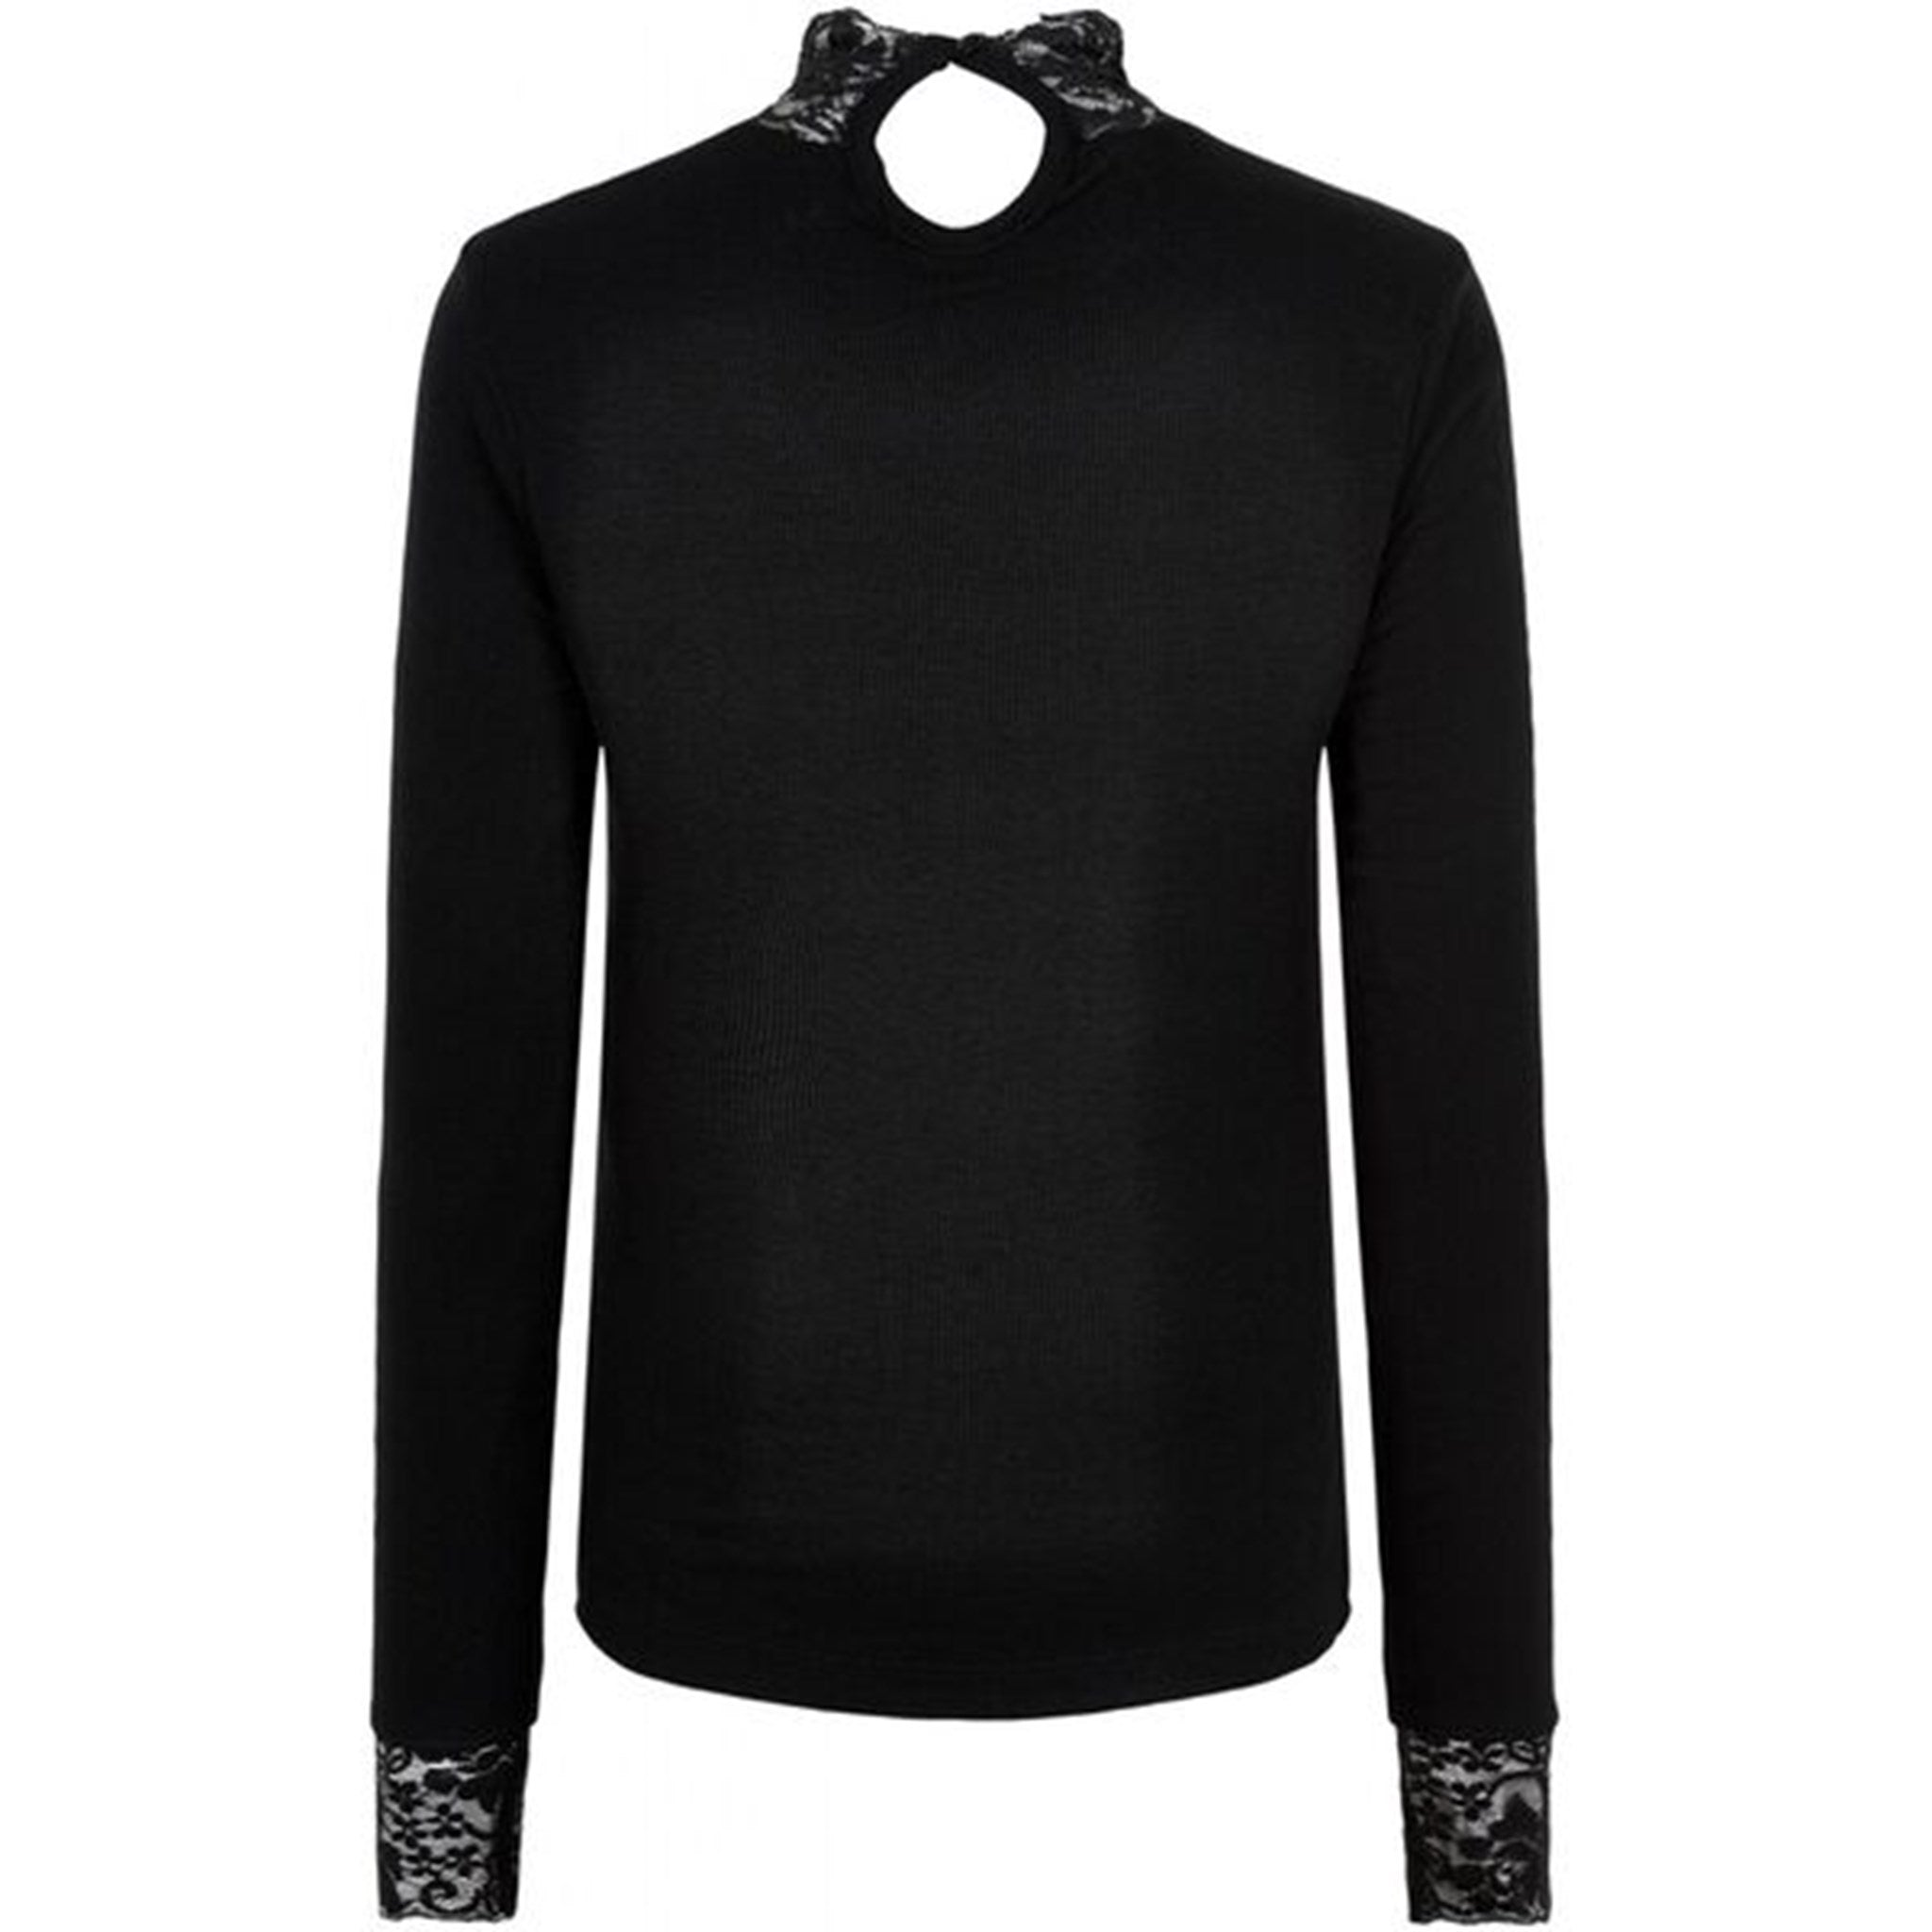 The New Olace Blouse Black 2